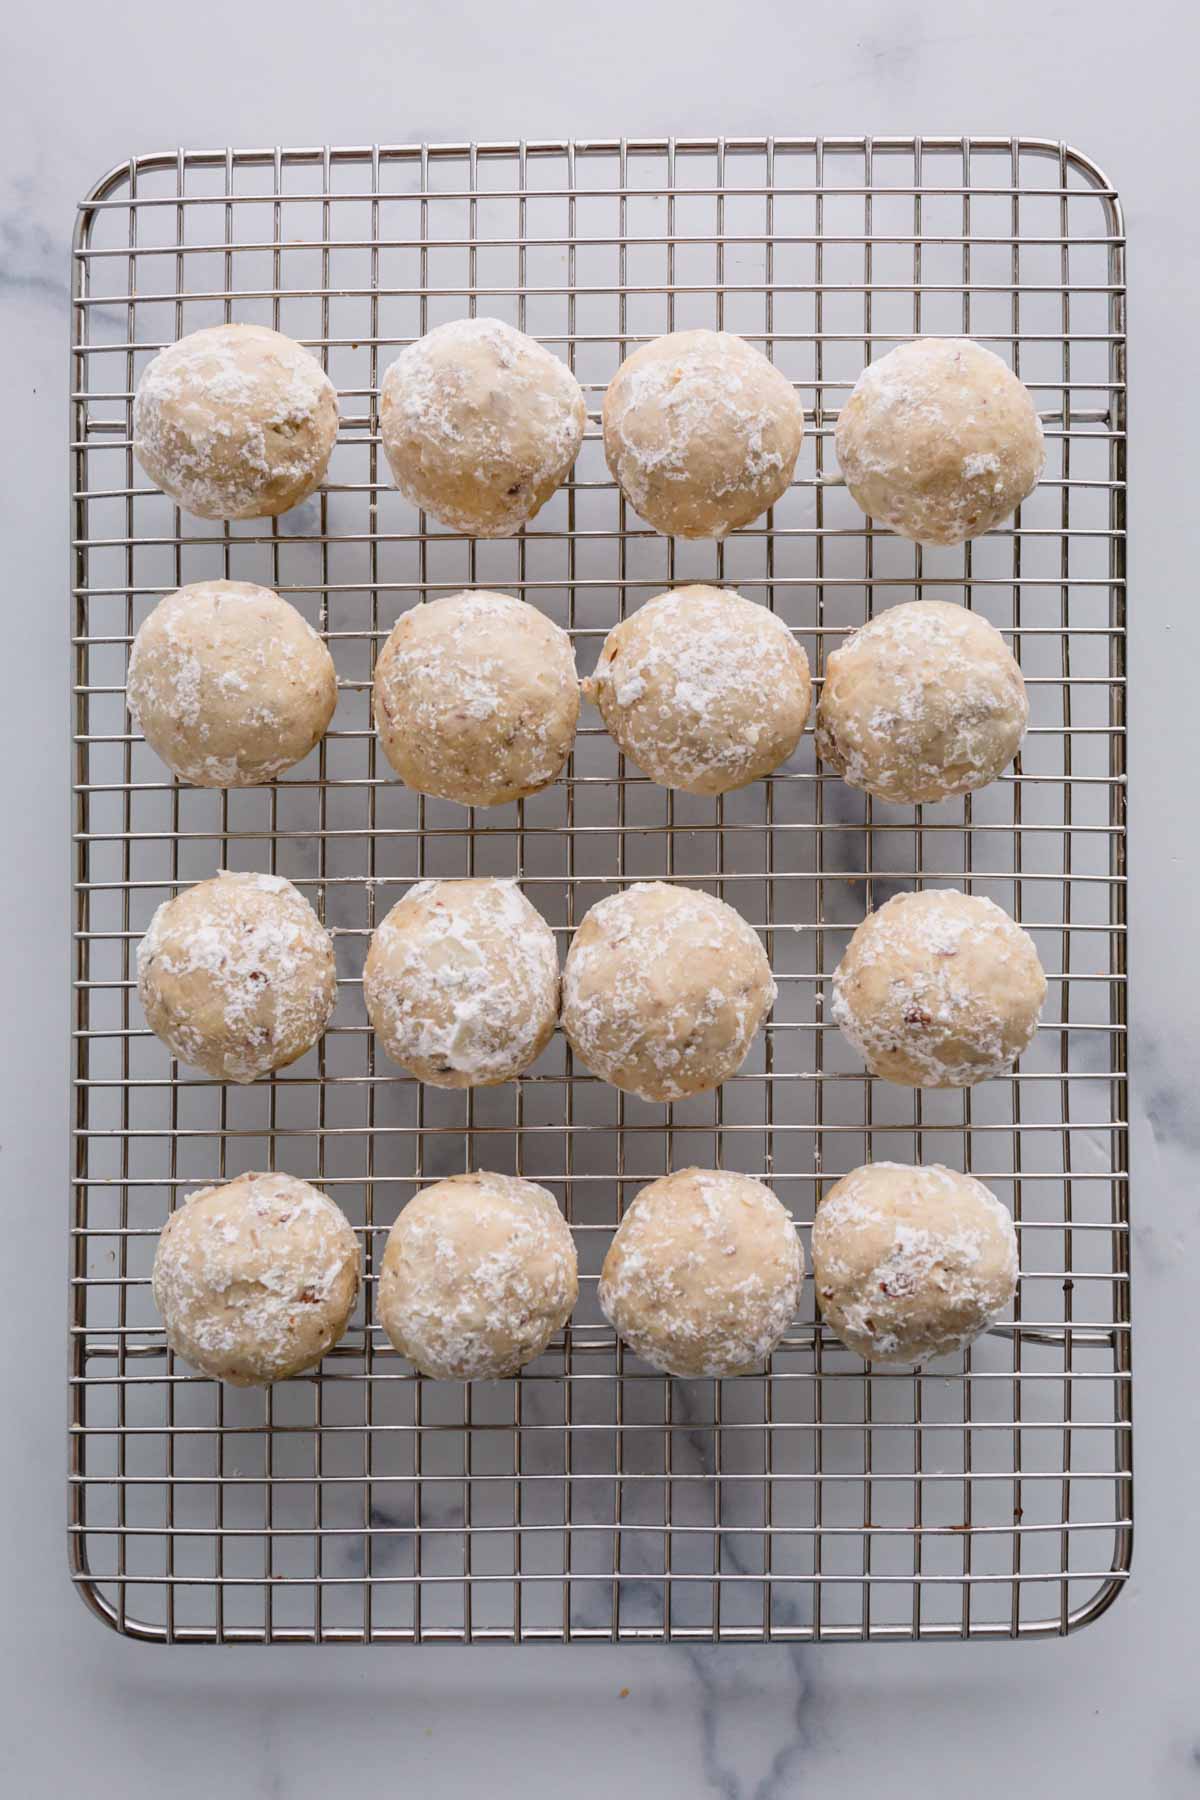 snowball cookies rolled in powedered sugar once and arranged on a wire rack.